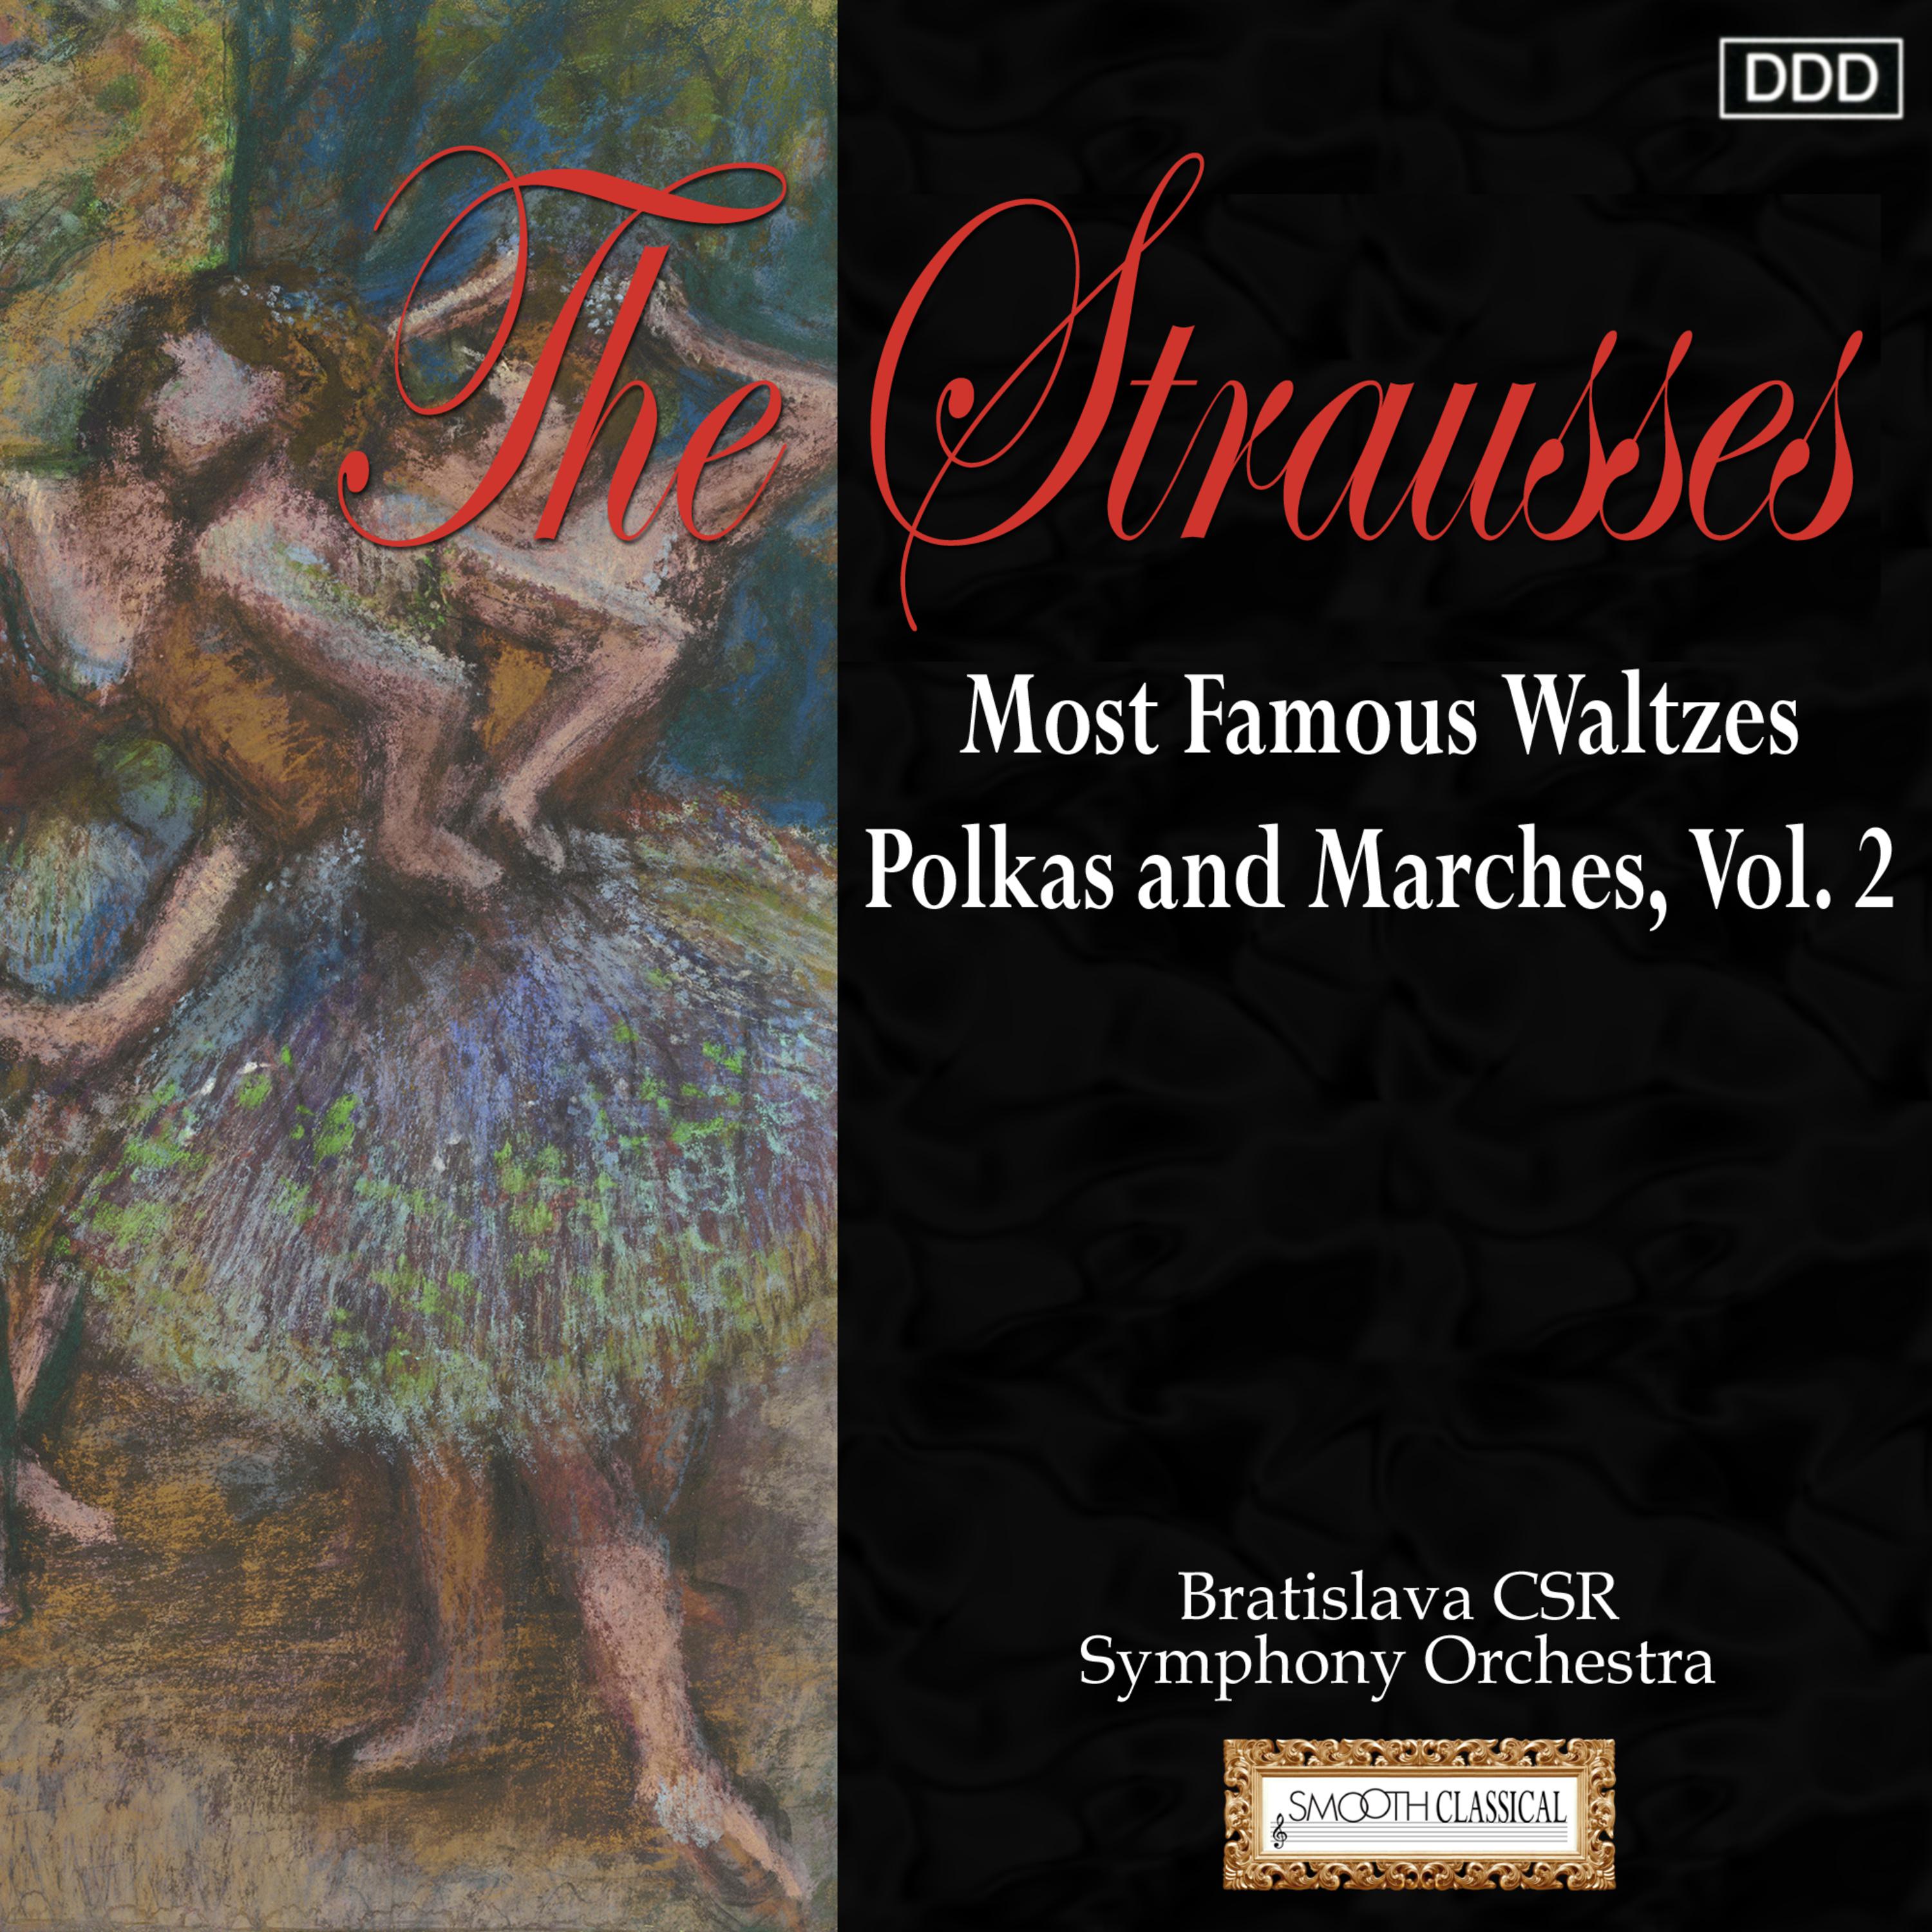 The Strausses: Most Famous Waltzes, Polkas and Marches, Vol. 2